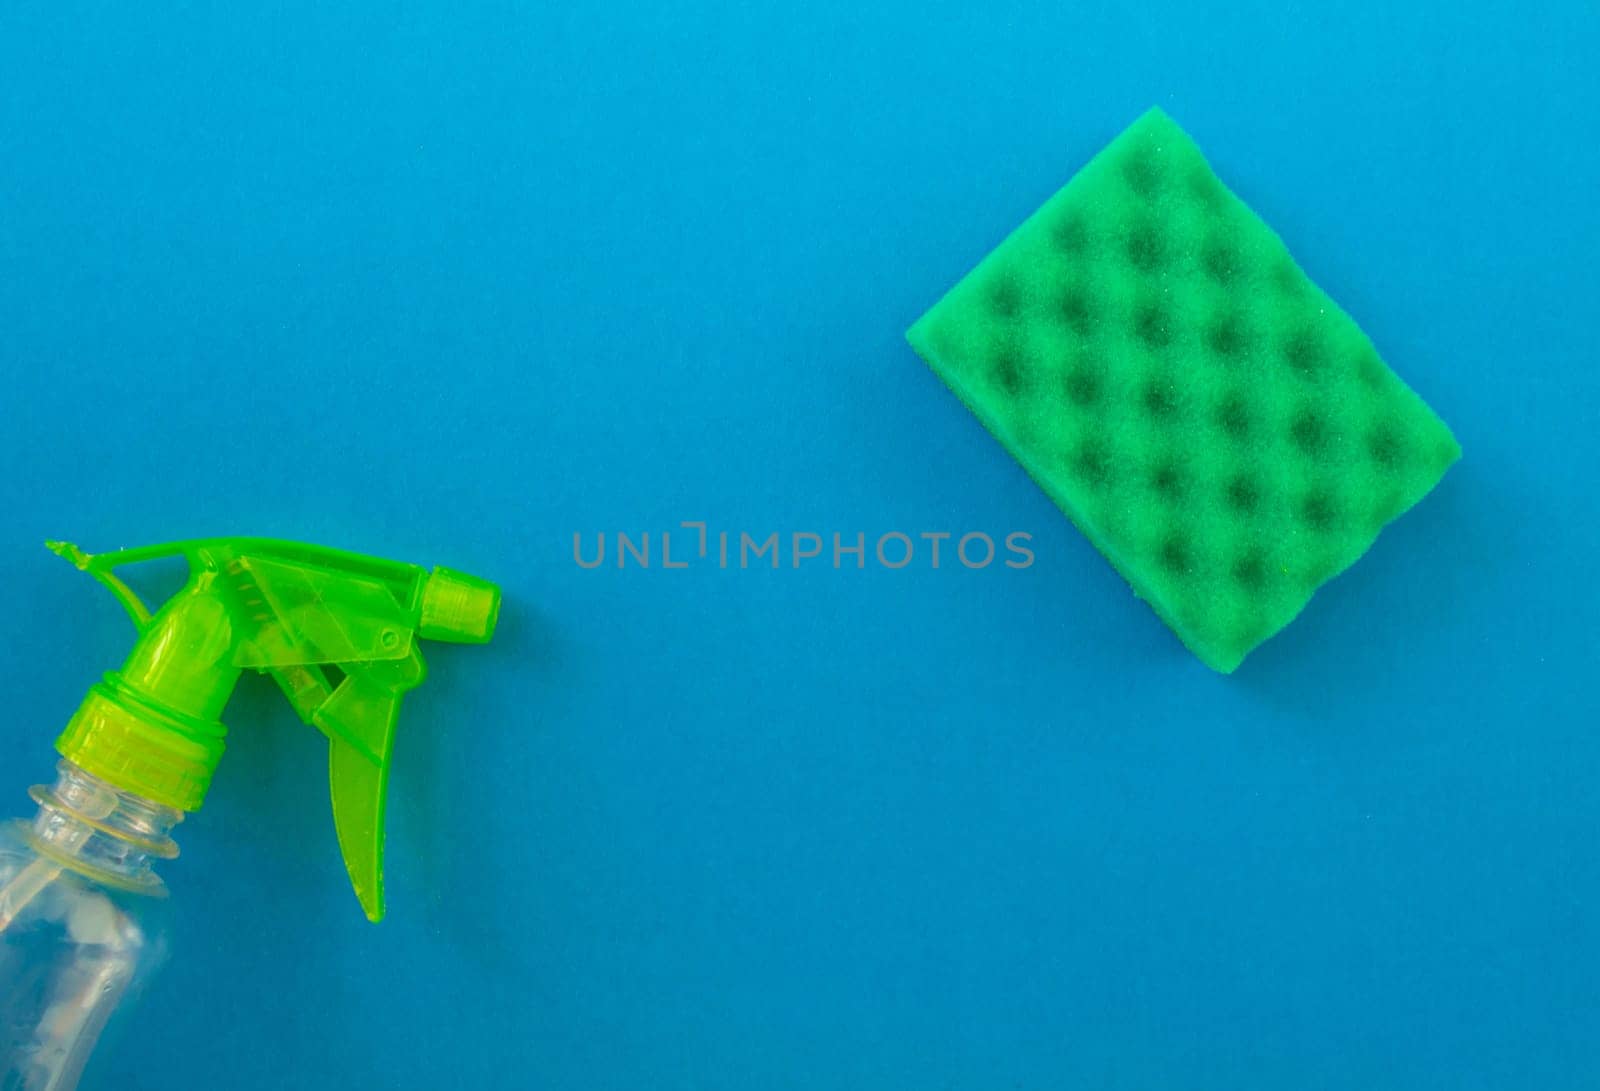 Cleaning. Flat lay sponge and cleaning product on a blue background. Cleaning supplies, top view.